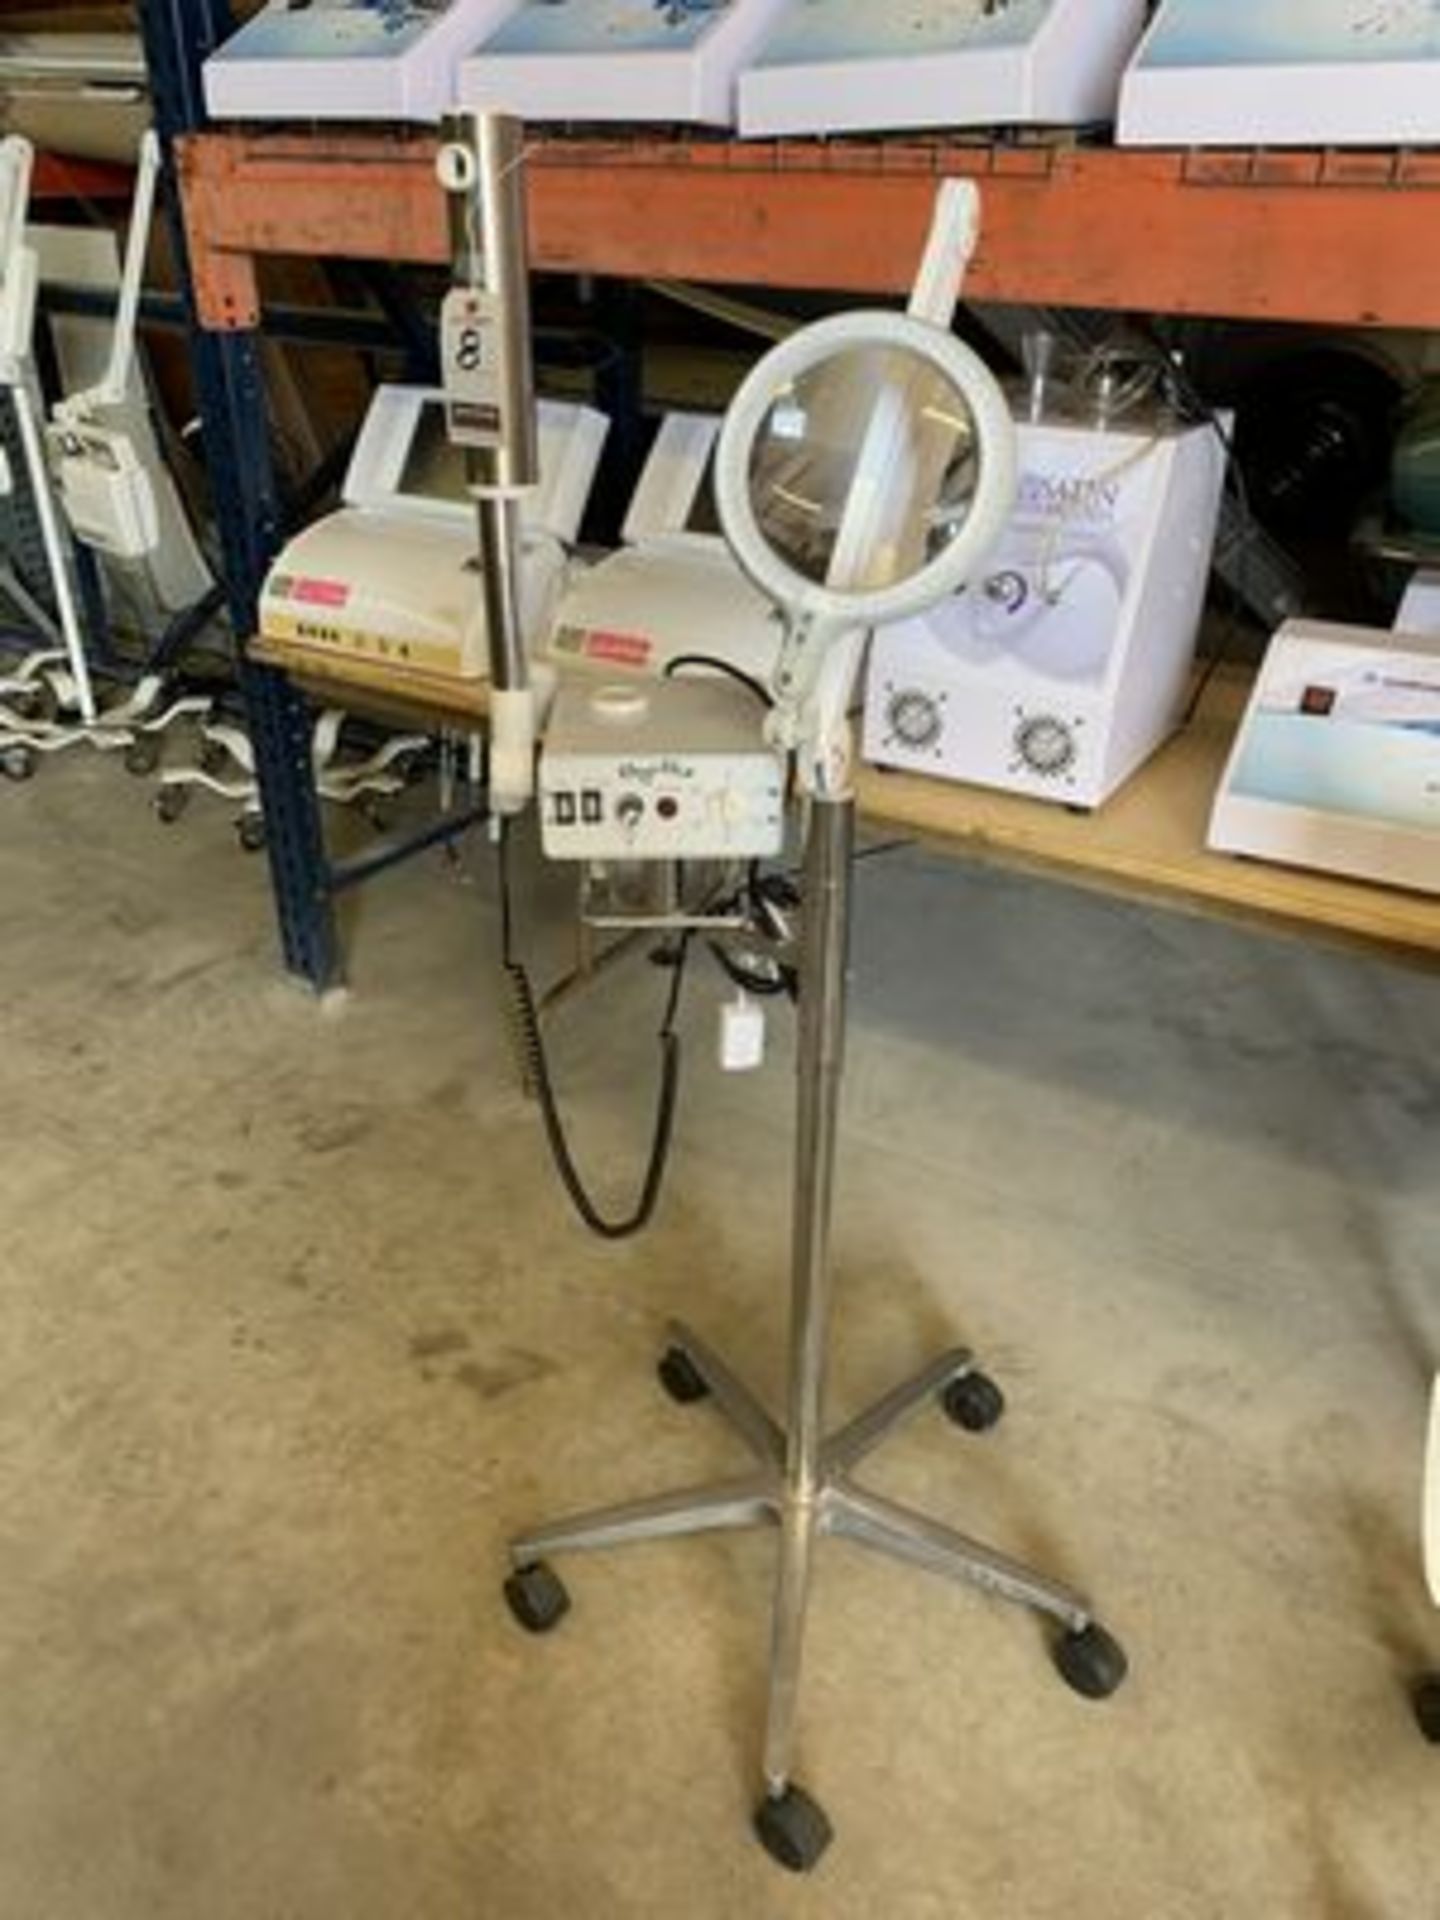 MAGIC MIST PORT. OZONE HIGH FREQUENCY STEAMER W/ 5 DIOPTER MAGNIFING LAMP, S/N 754262